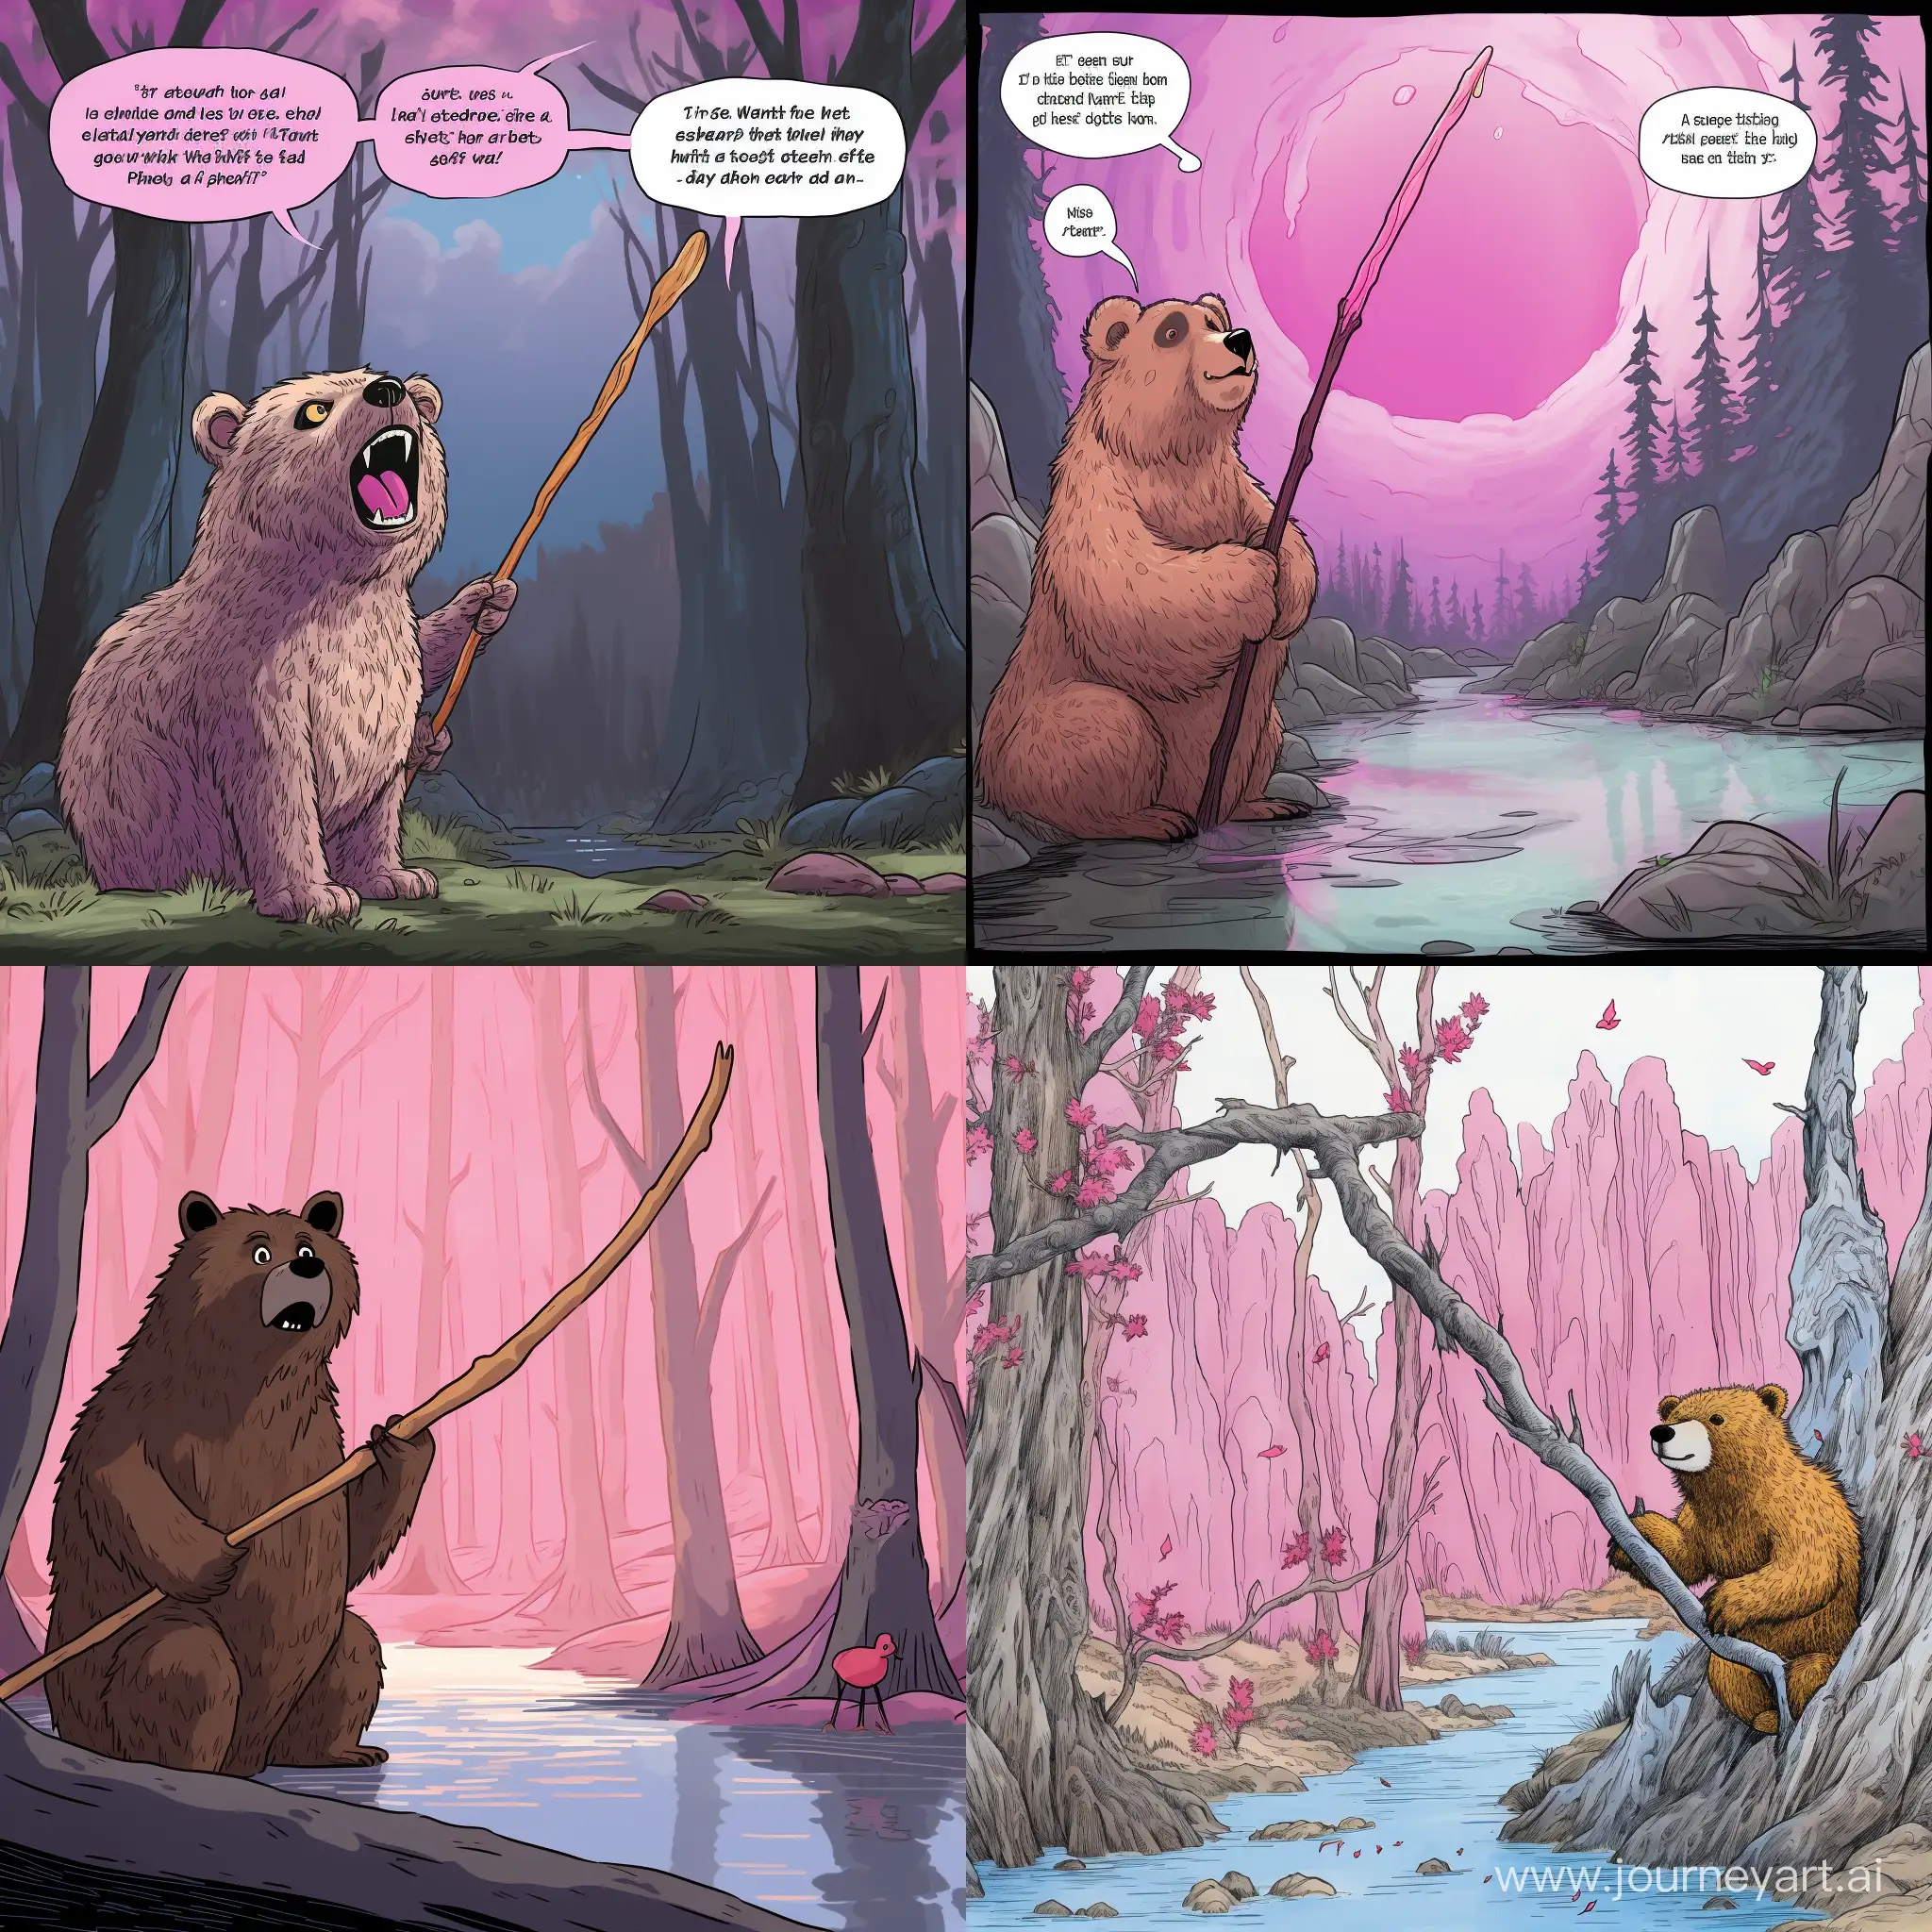 Whimsical-Bear-Comedy-Playful-Scene-with-a-Pink-Stick